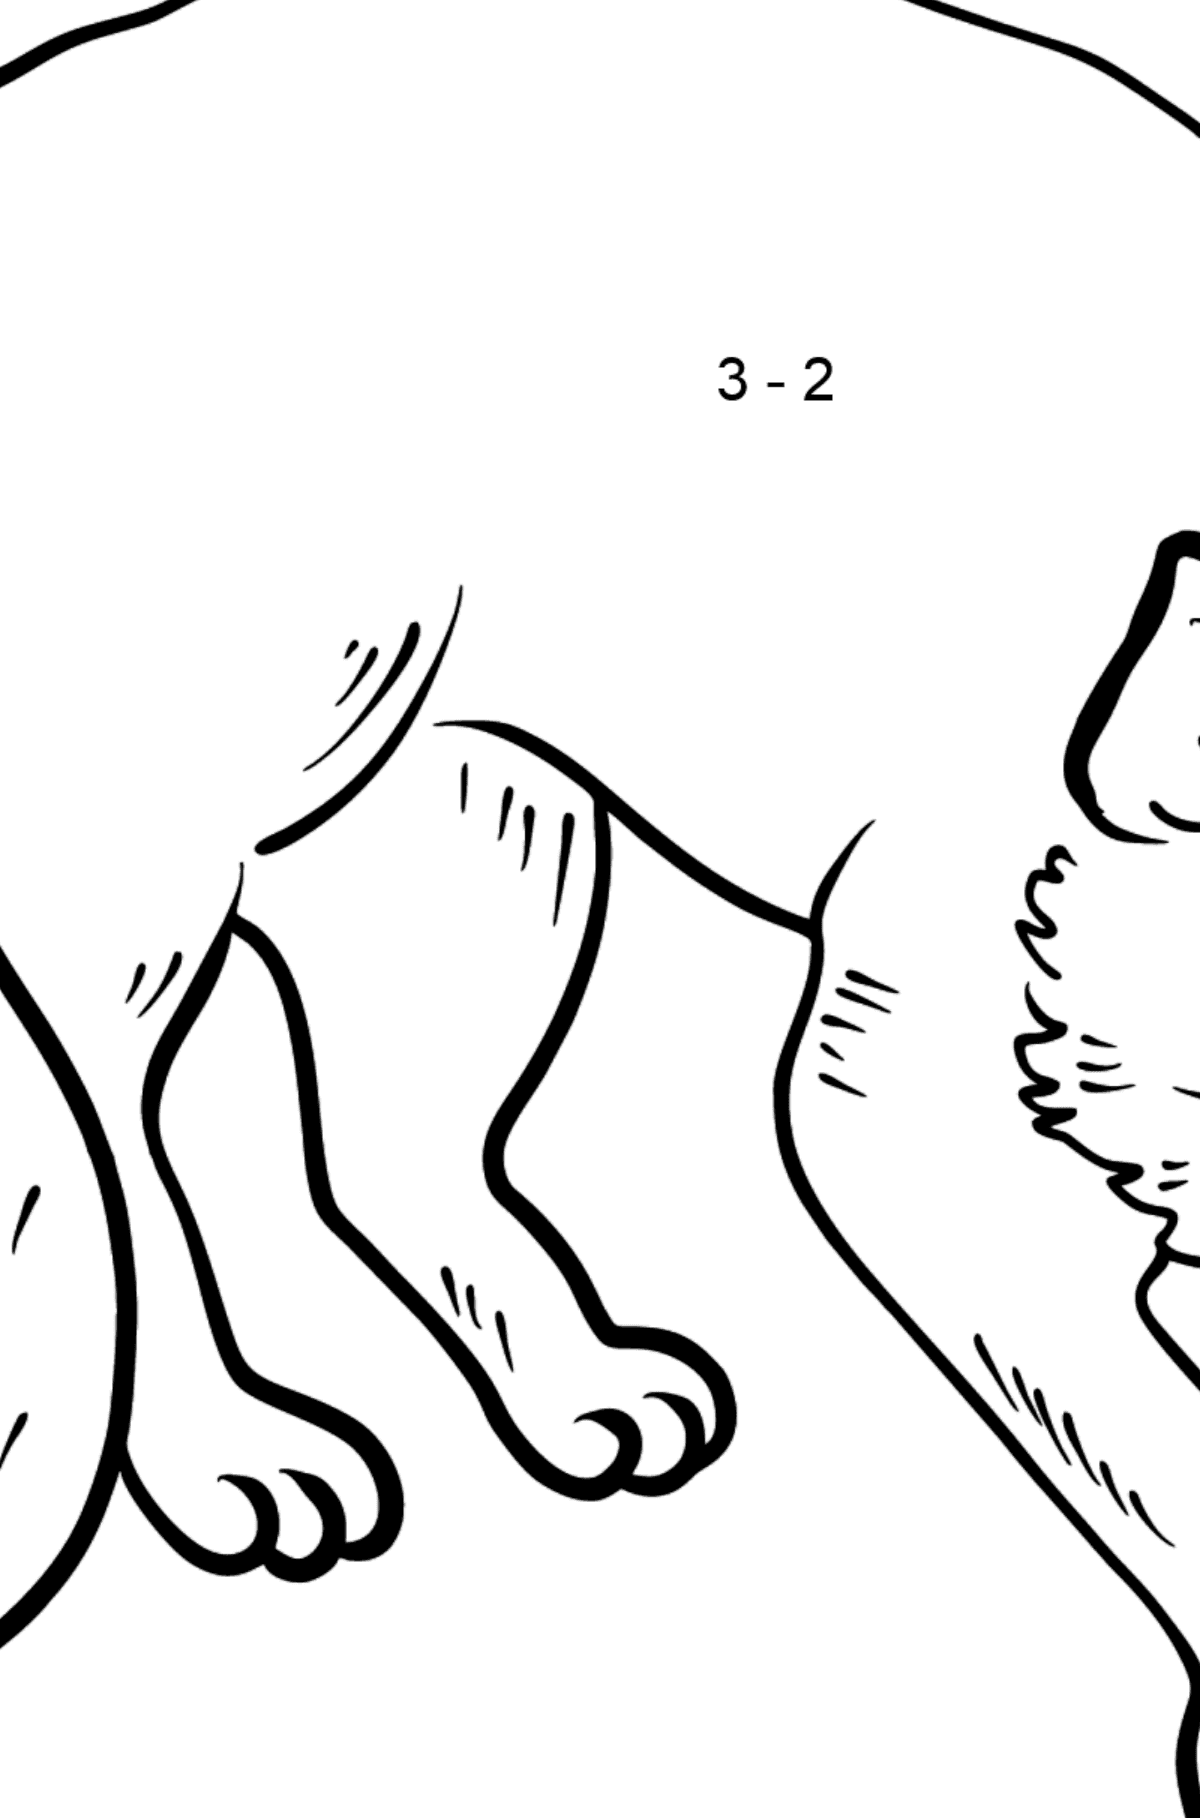 Fox coloring page - Math Coloring - Subtraction for Kids